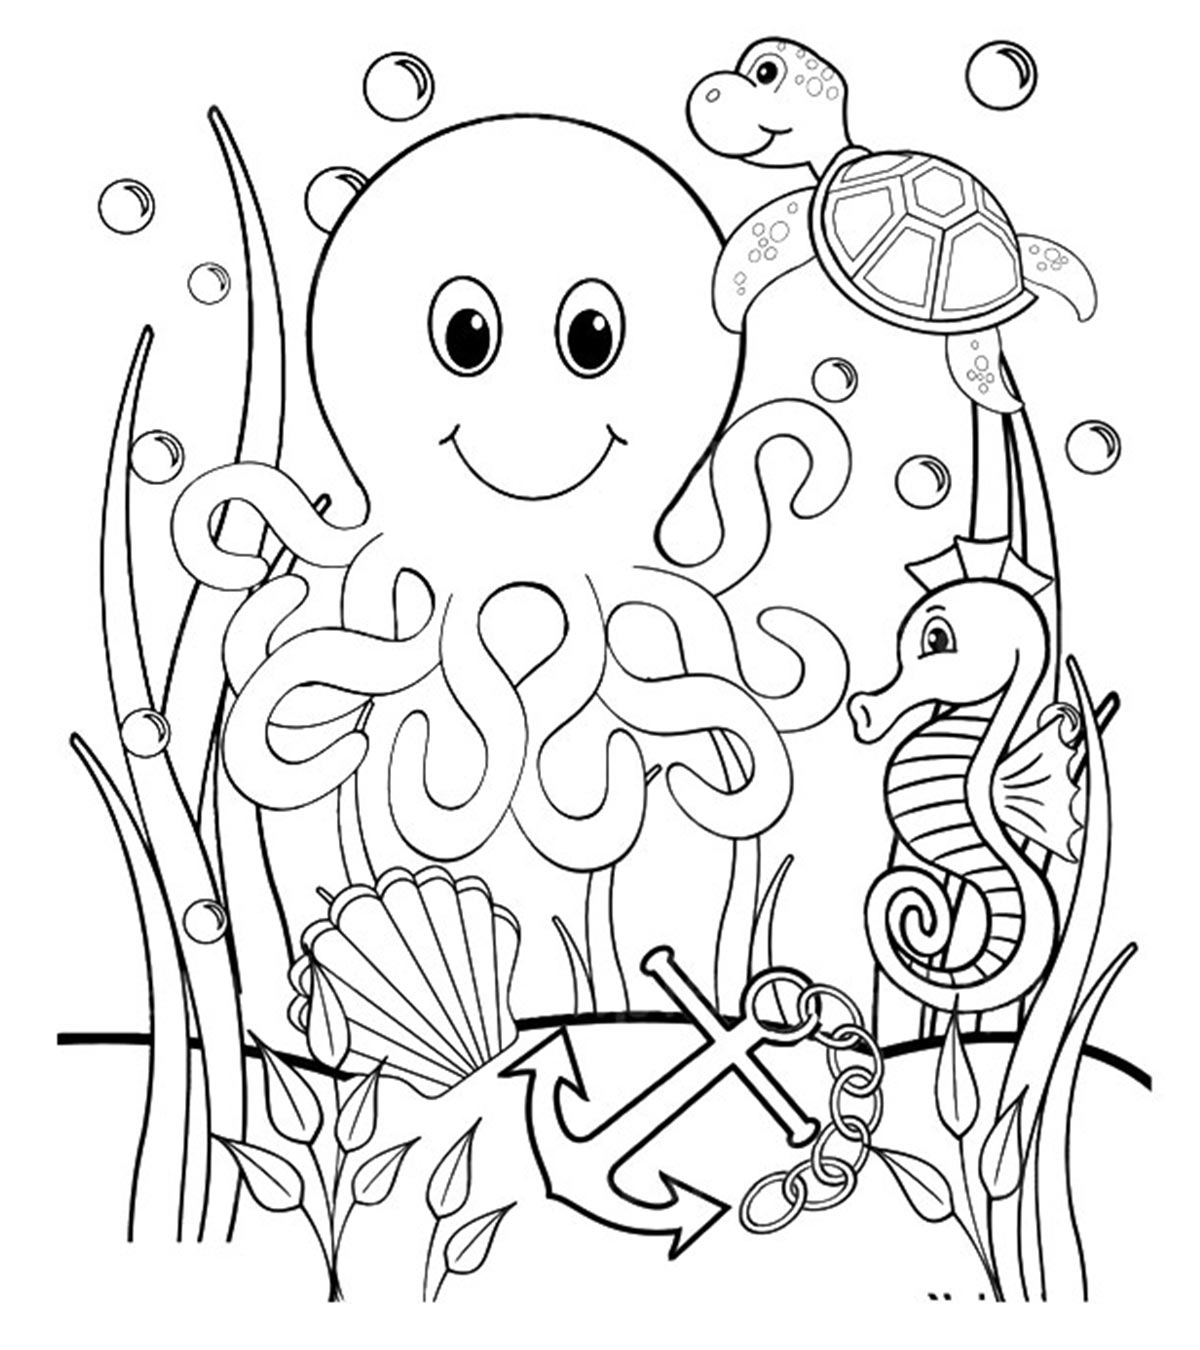 Underwater Coloring Pages Coloringnori Coloring Pages for Kids